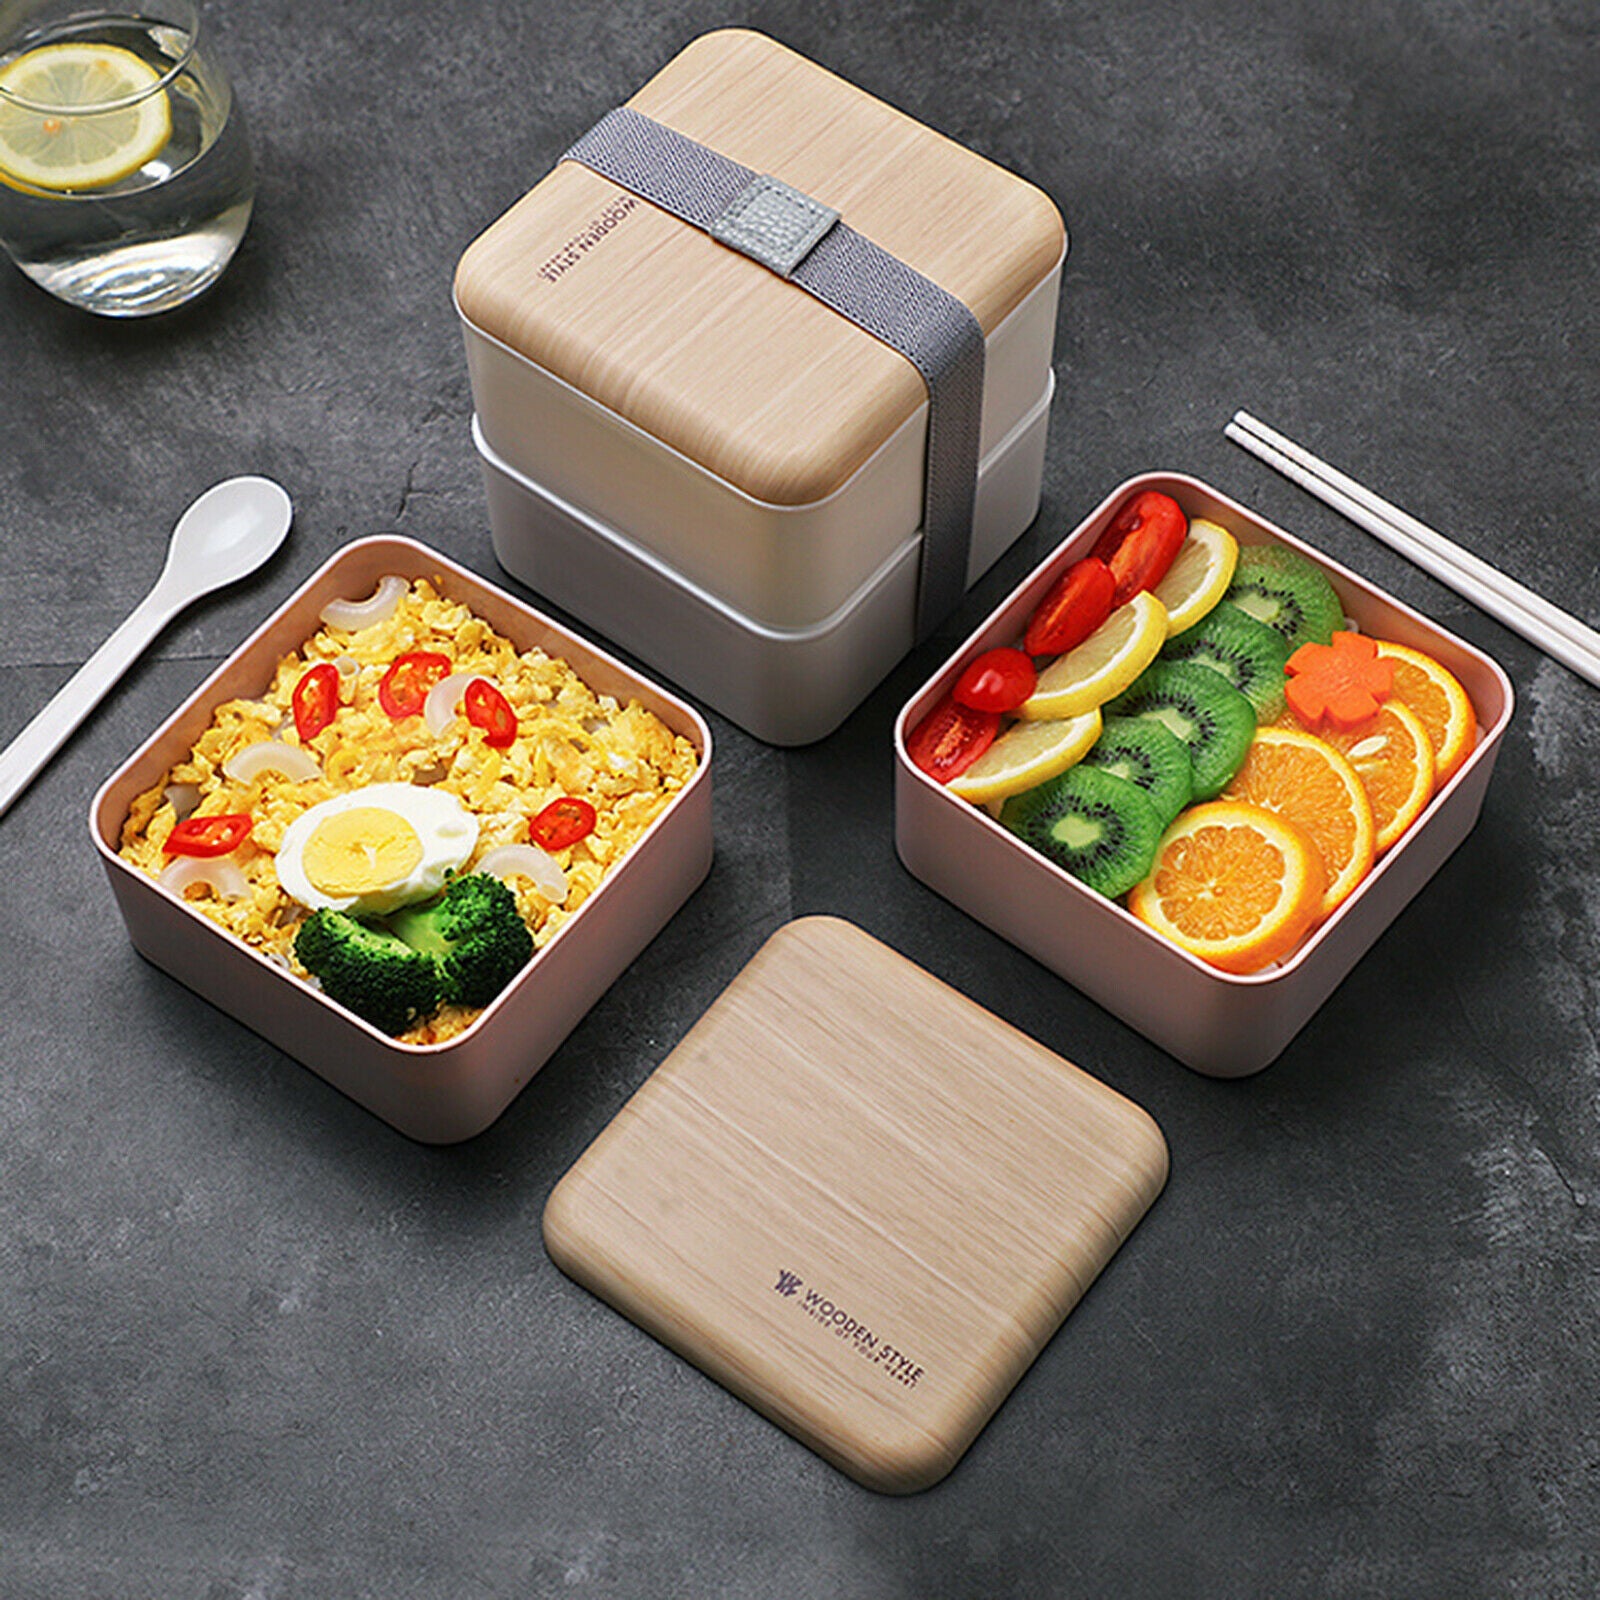 Lunch Box Flatware Included Meal Prep Containers for Office Worker Kids